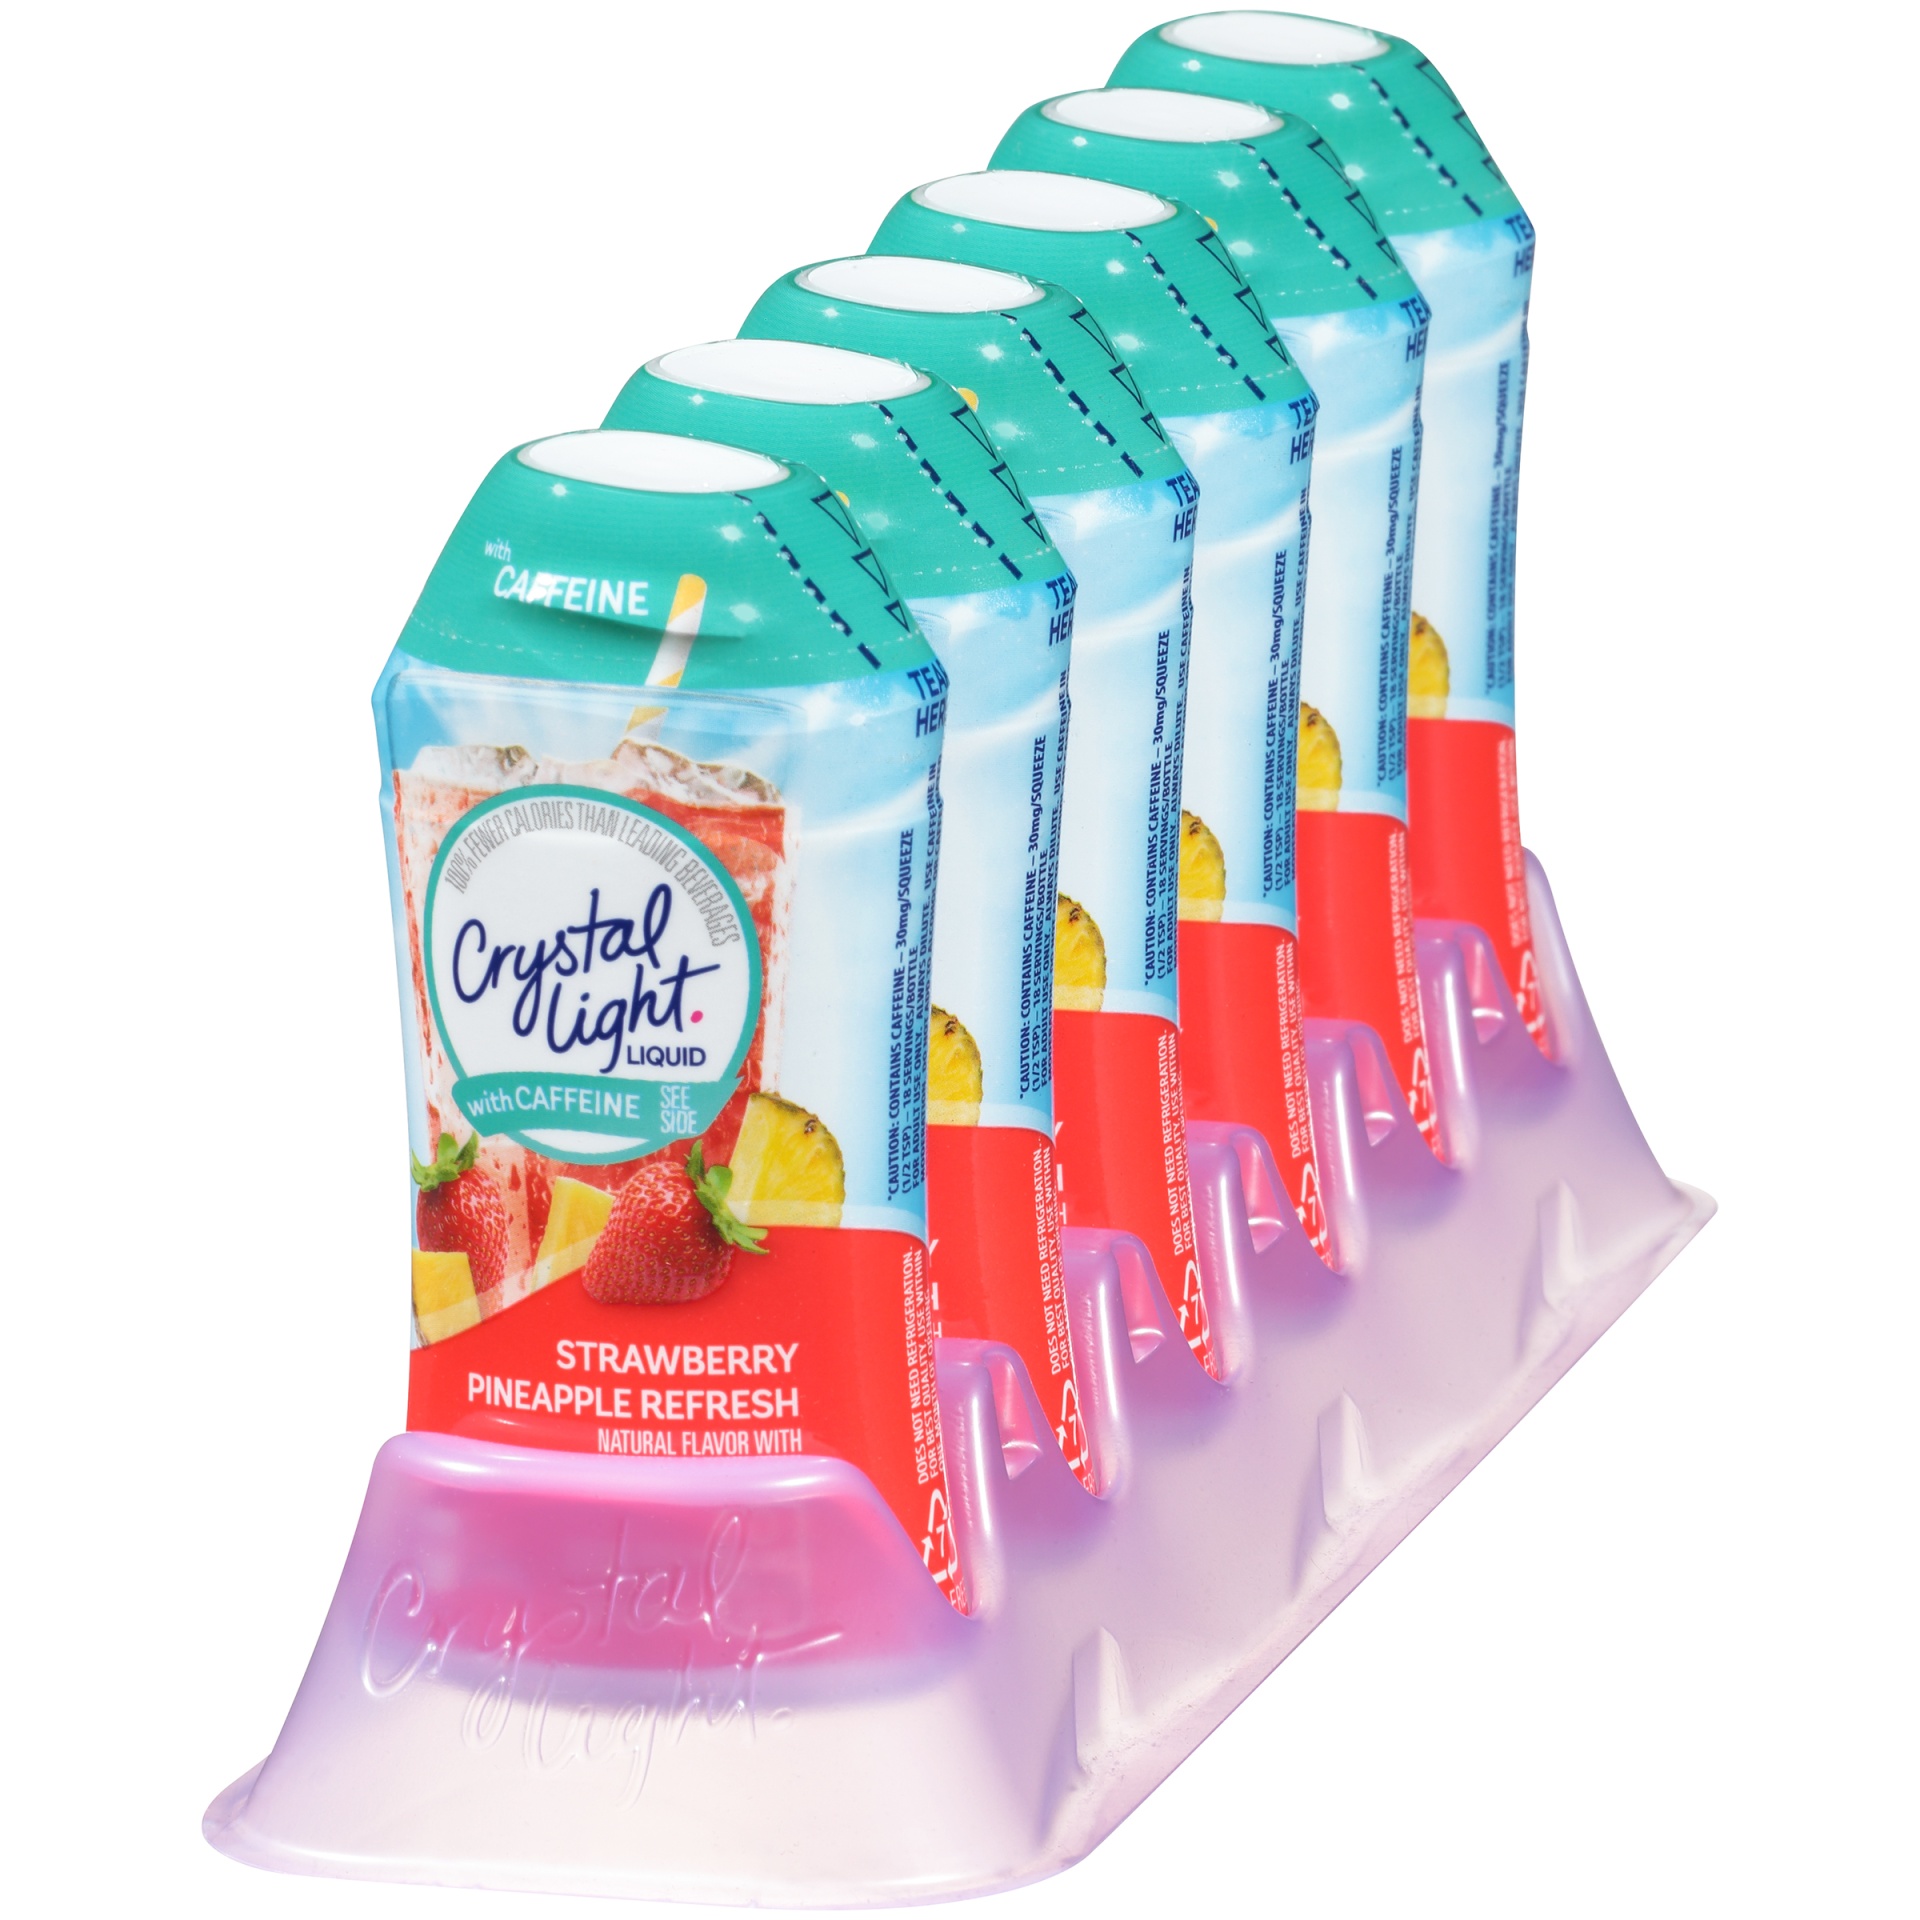 slide 8 of 11, Crystal Light Liquid Strawberry Pineapple Refresh Naturally Flavored Drink Mix with Caffeine, 1.62 oz